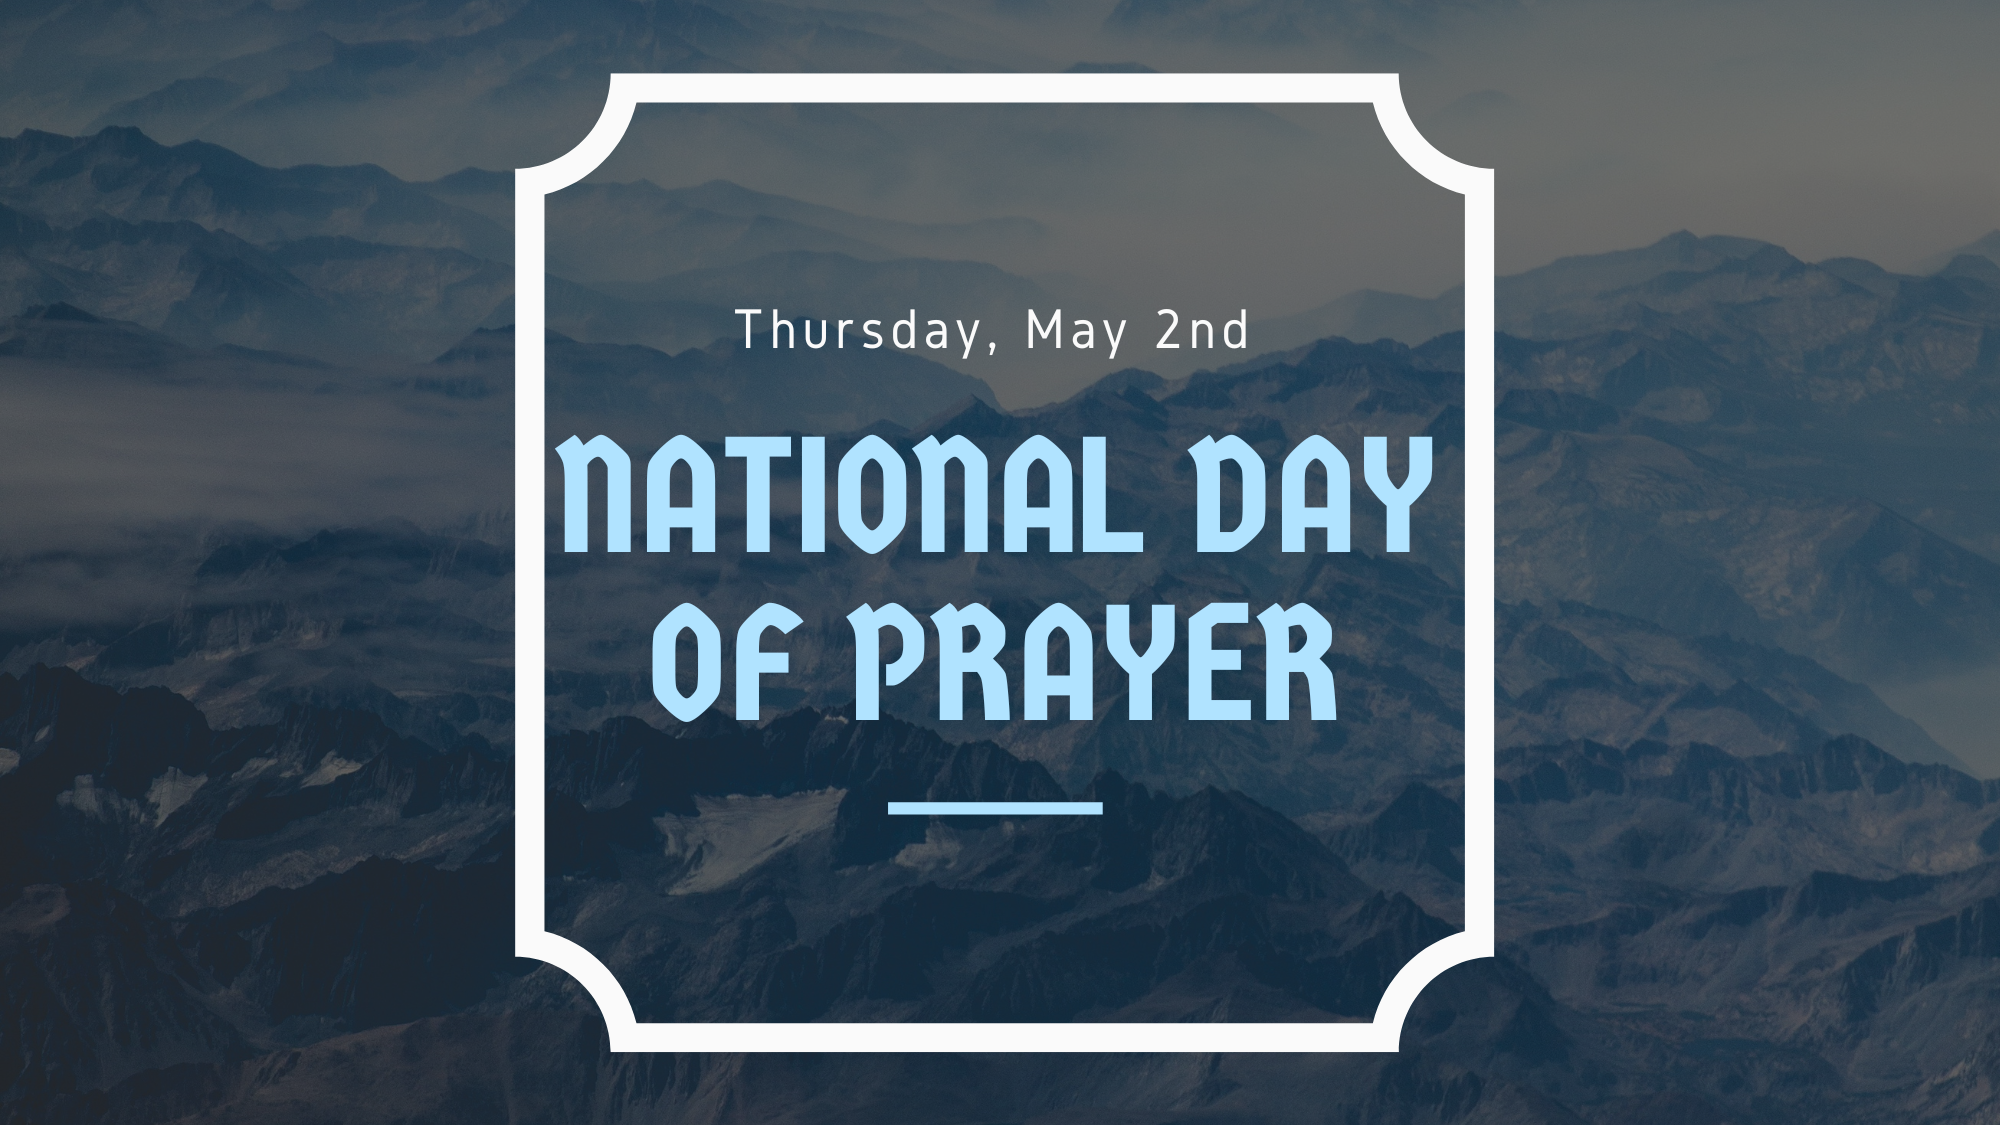 National Day of Prayer promotional banner